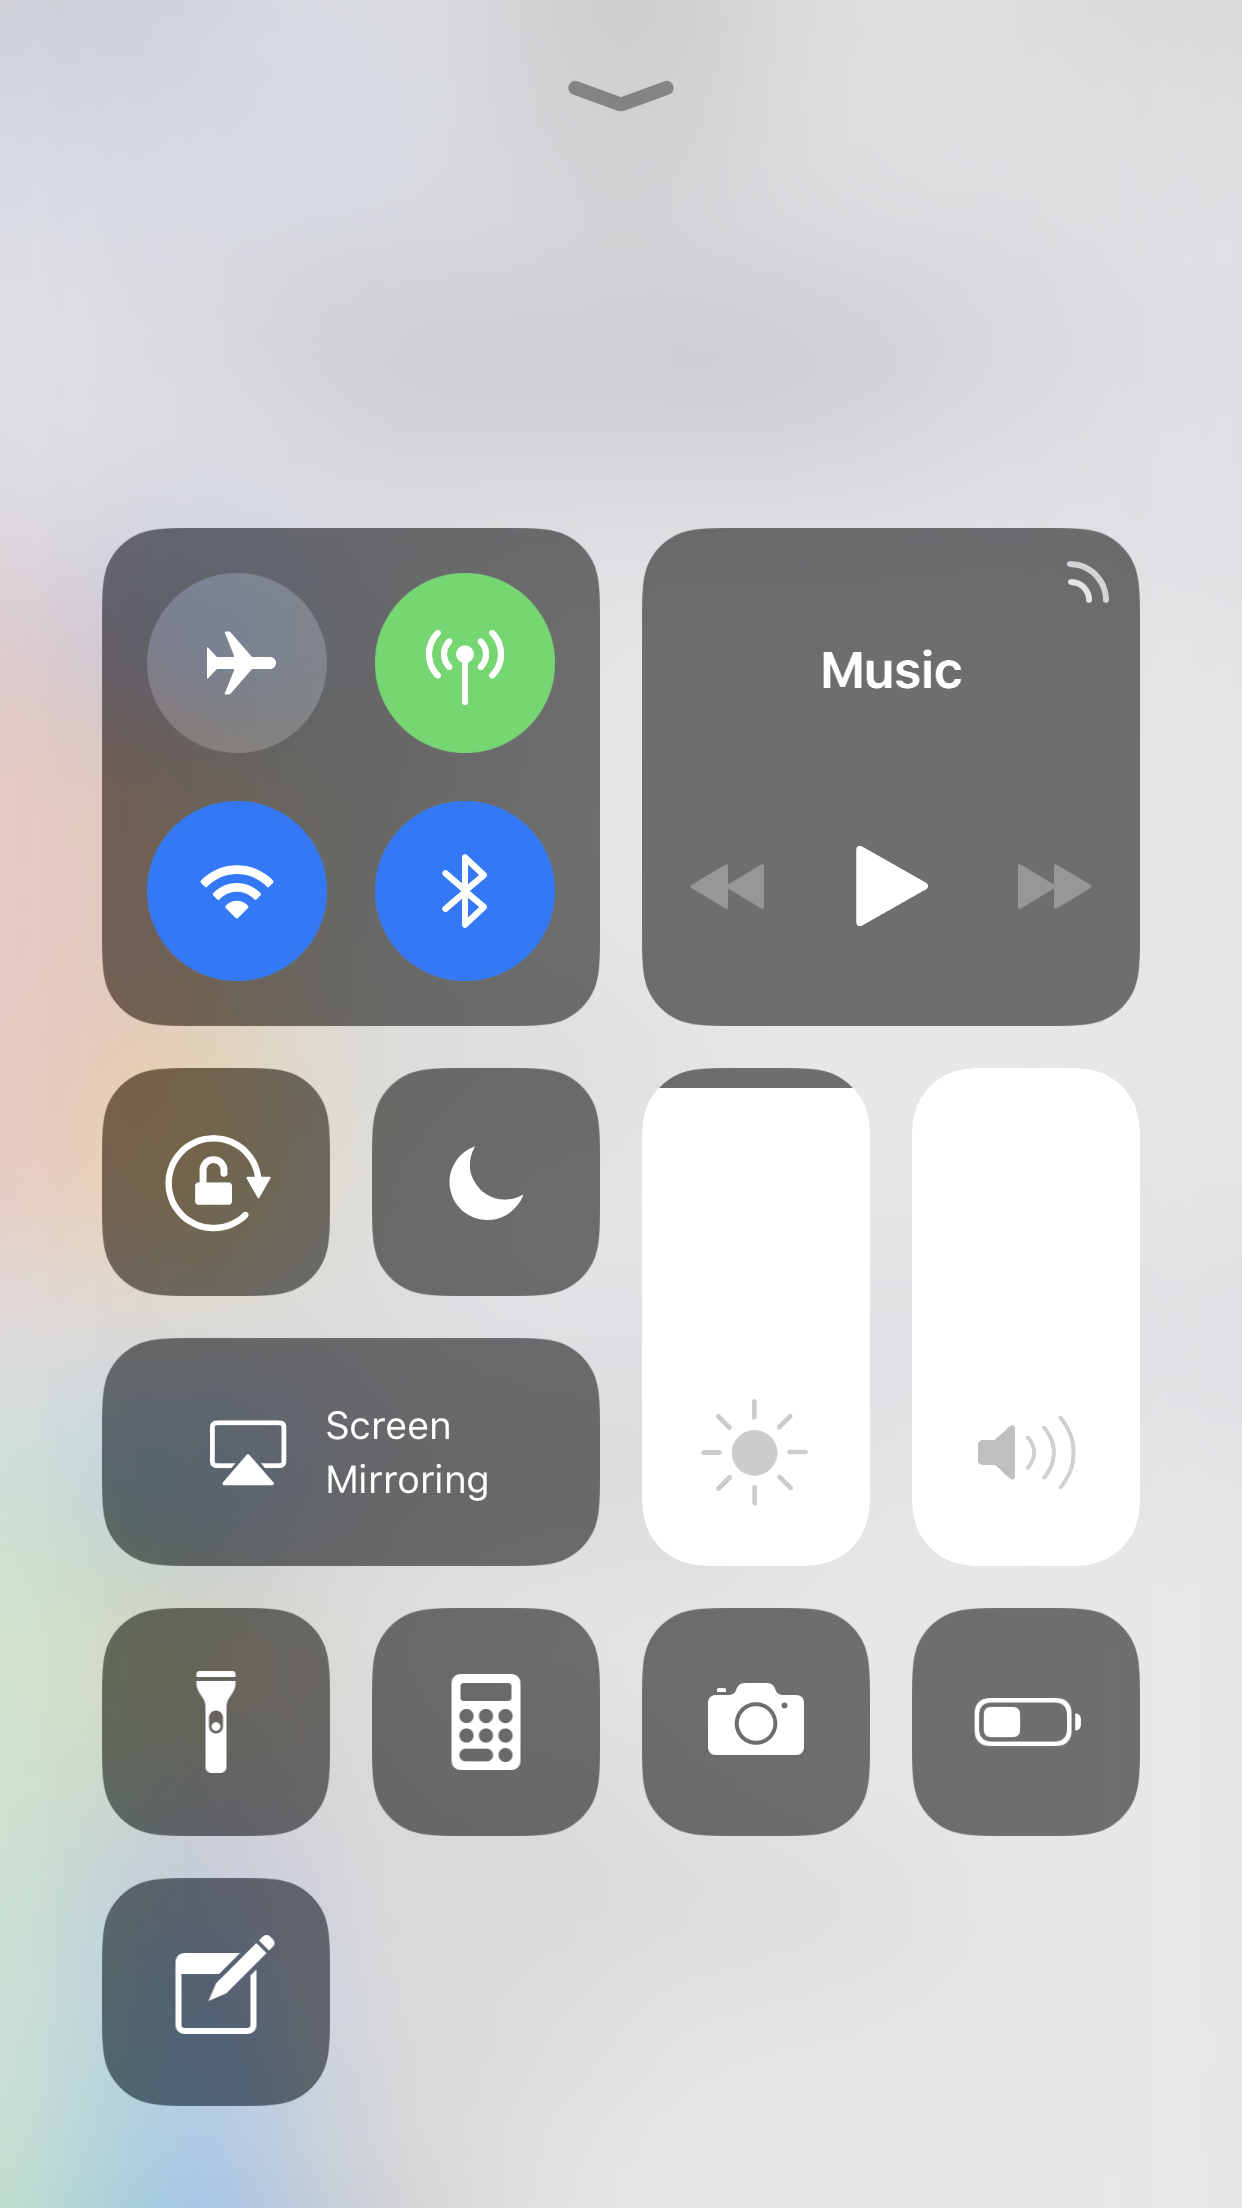 How to Customize Control Center in iOS 11 [Video]